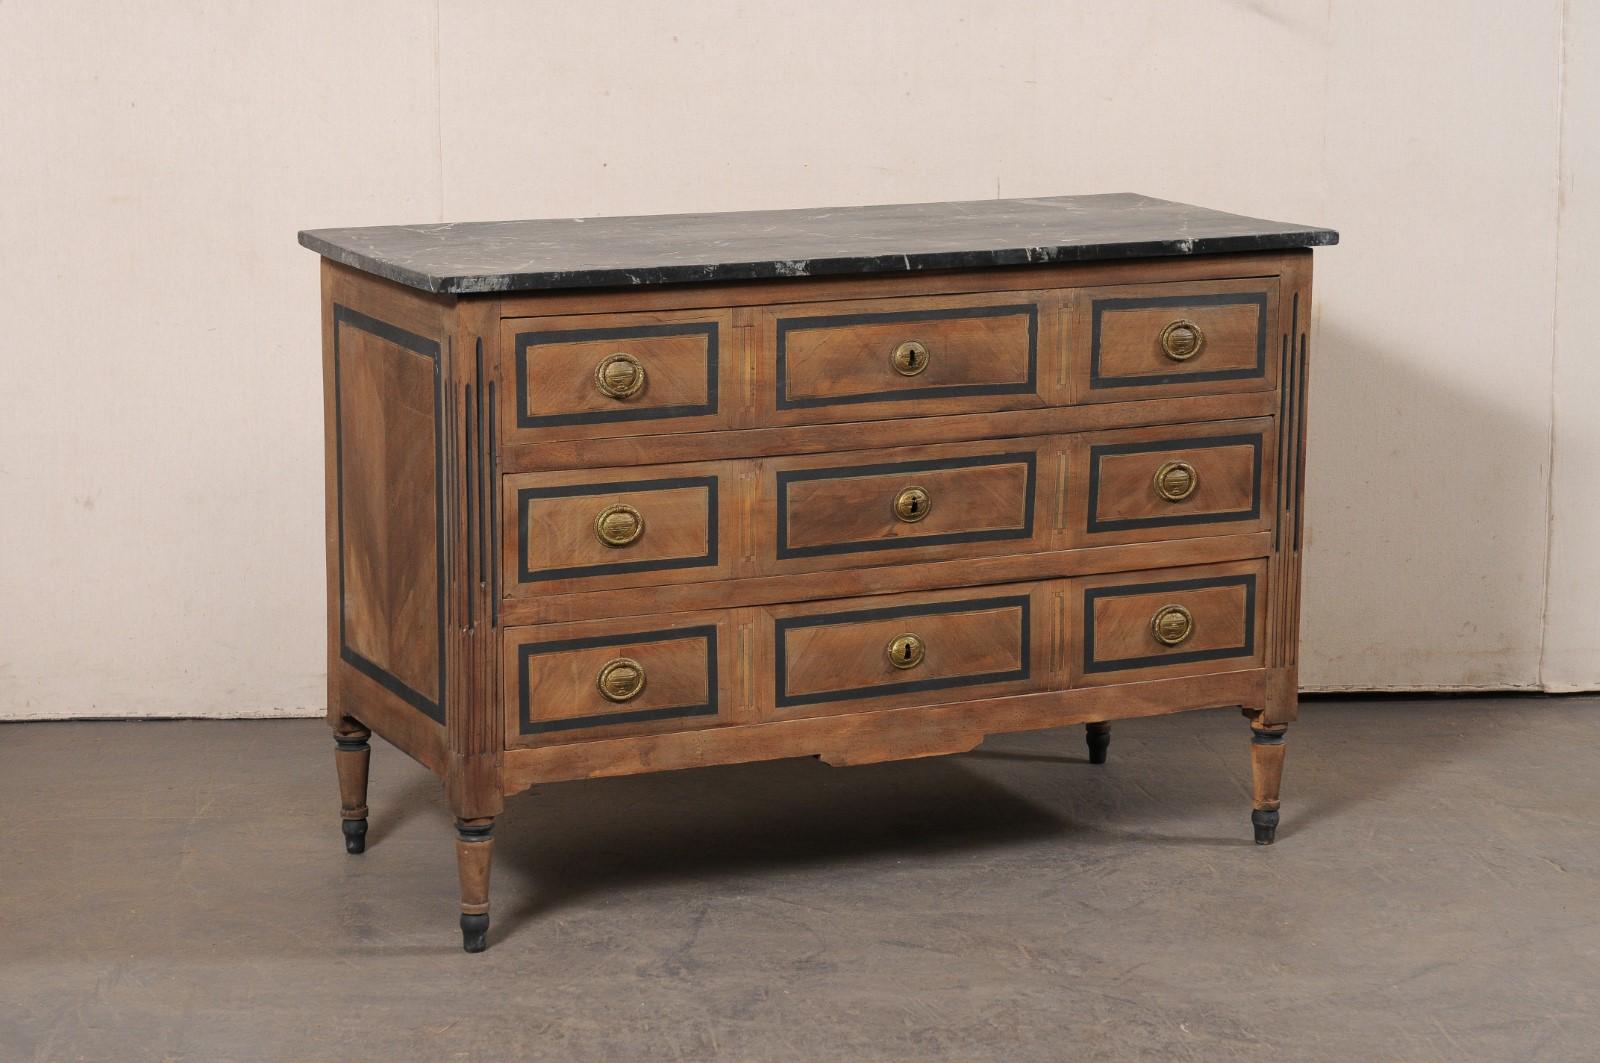 A French Neoclassical chest, with faux marble top and brass hardware, from the 19th century. This antique chest from France features a rectangular-shaped faux-marble top, which overhangs the neoclassical case which houses three full size graduated